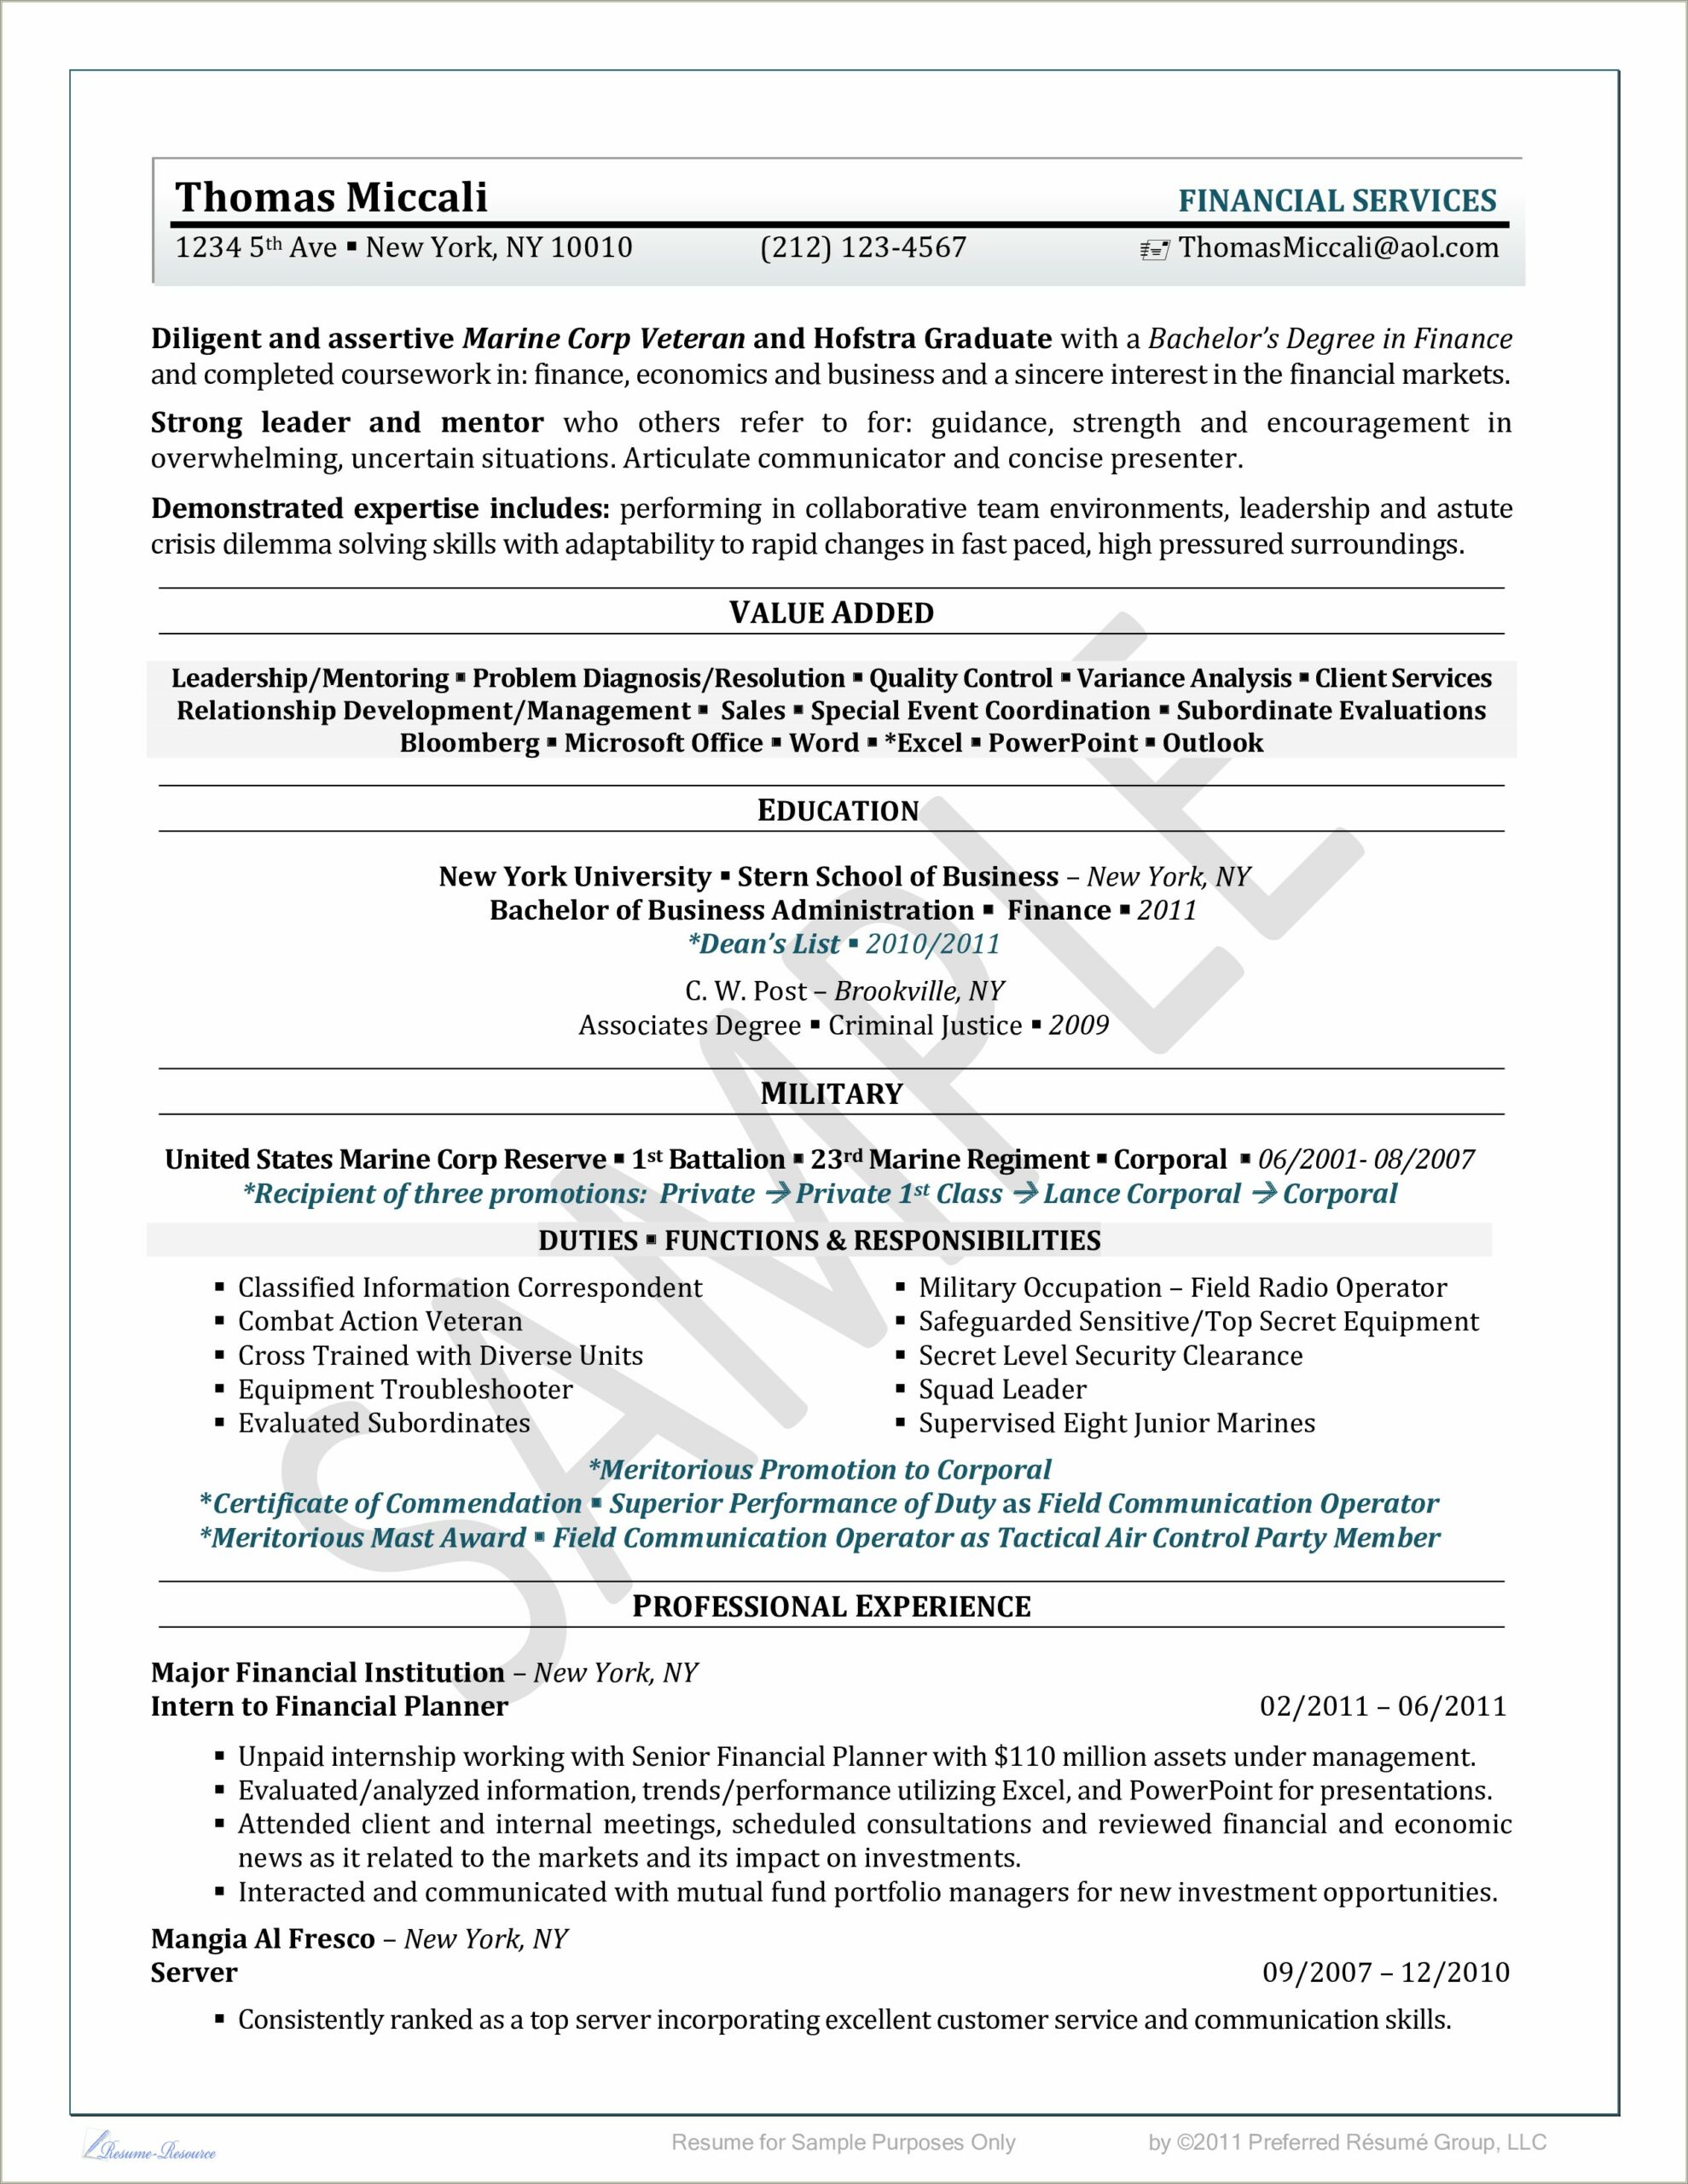 Resumes That Include Military A School